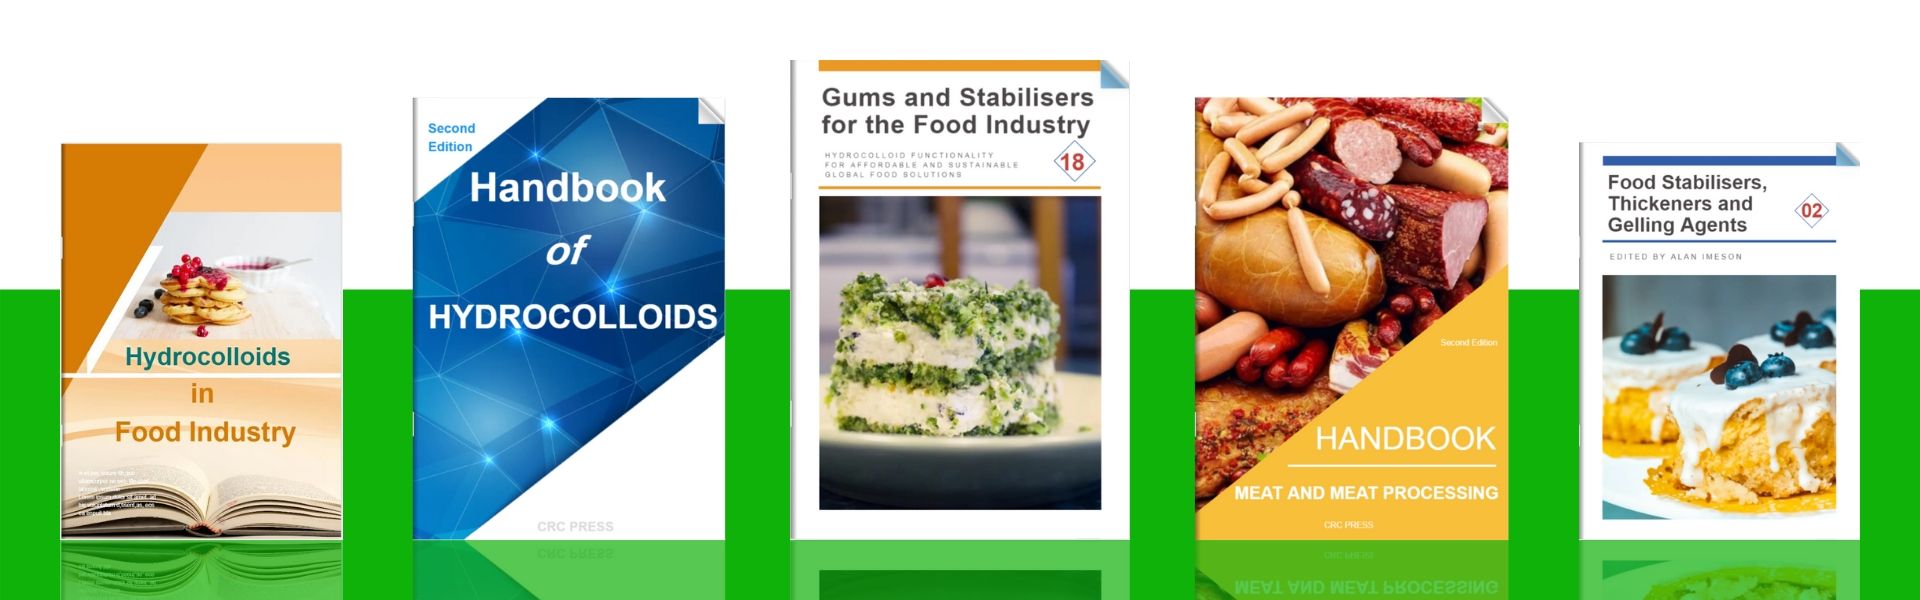 Download the Handbook of Hydrocolloids in Food Industry